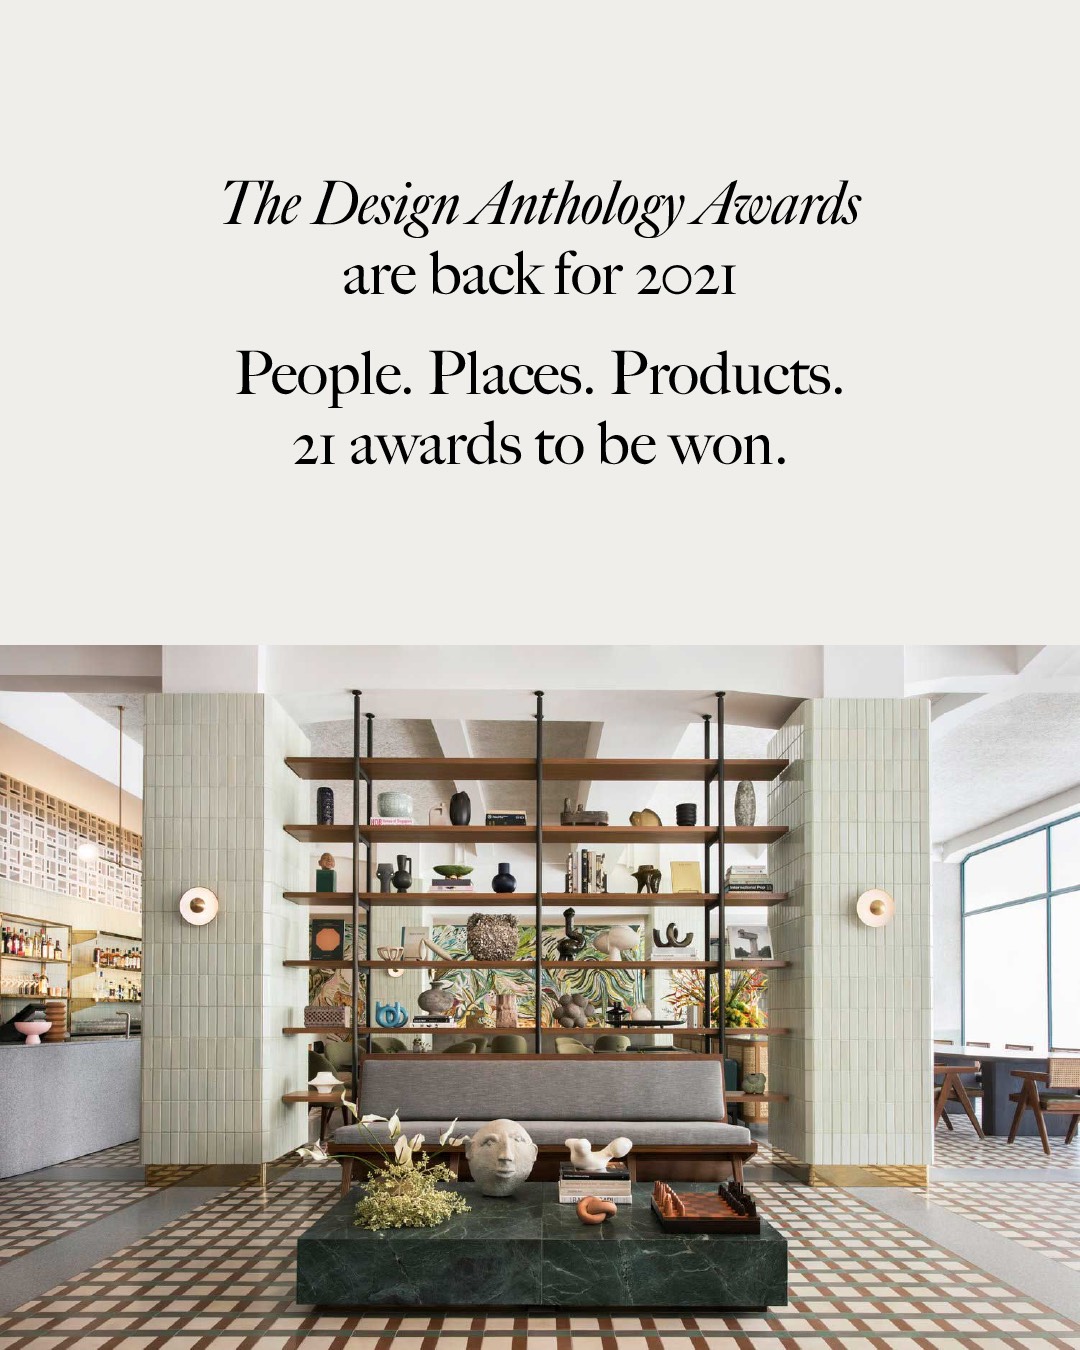 The Design Anthorogy Awards are back for 2021